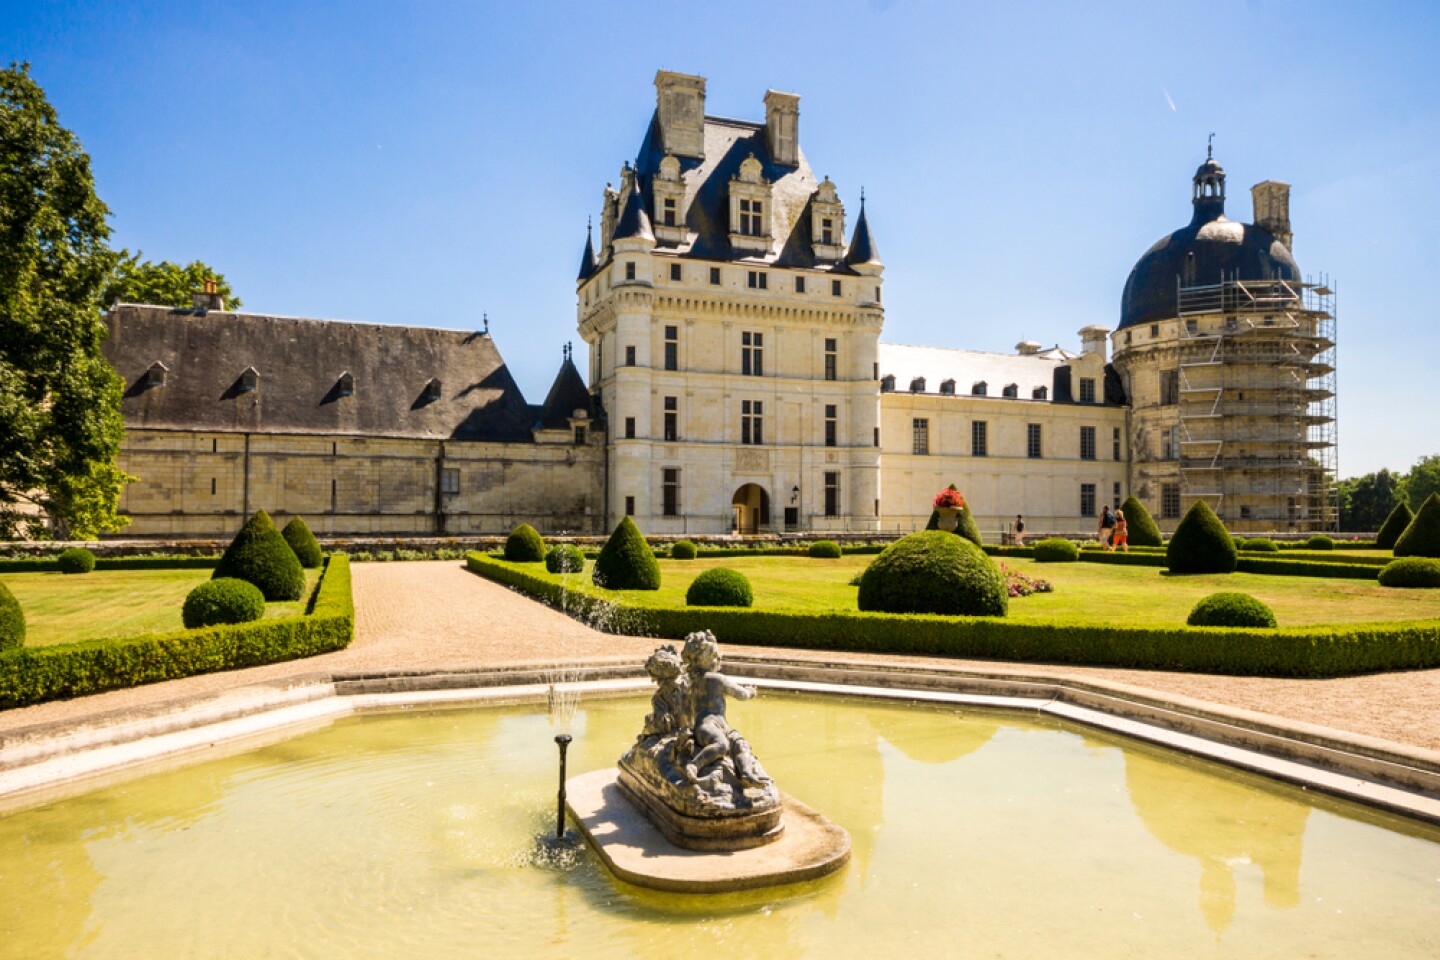 <a>The Château de Valençay's architecture is mainly influenced by Renaissance and classical styles.</a>